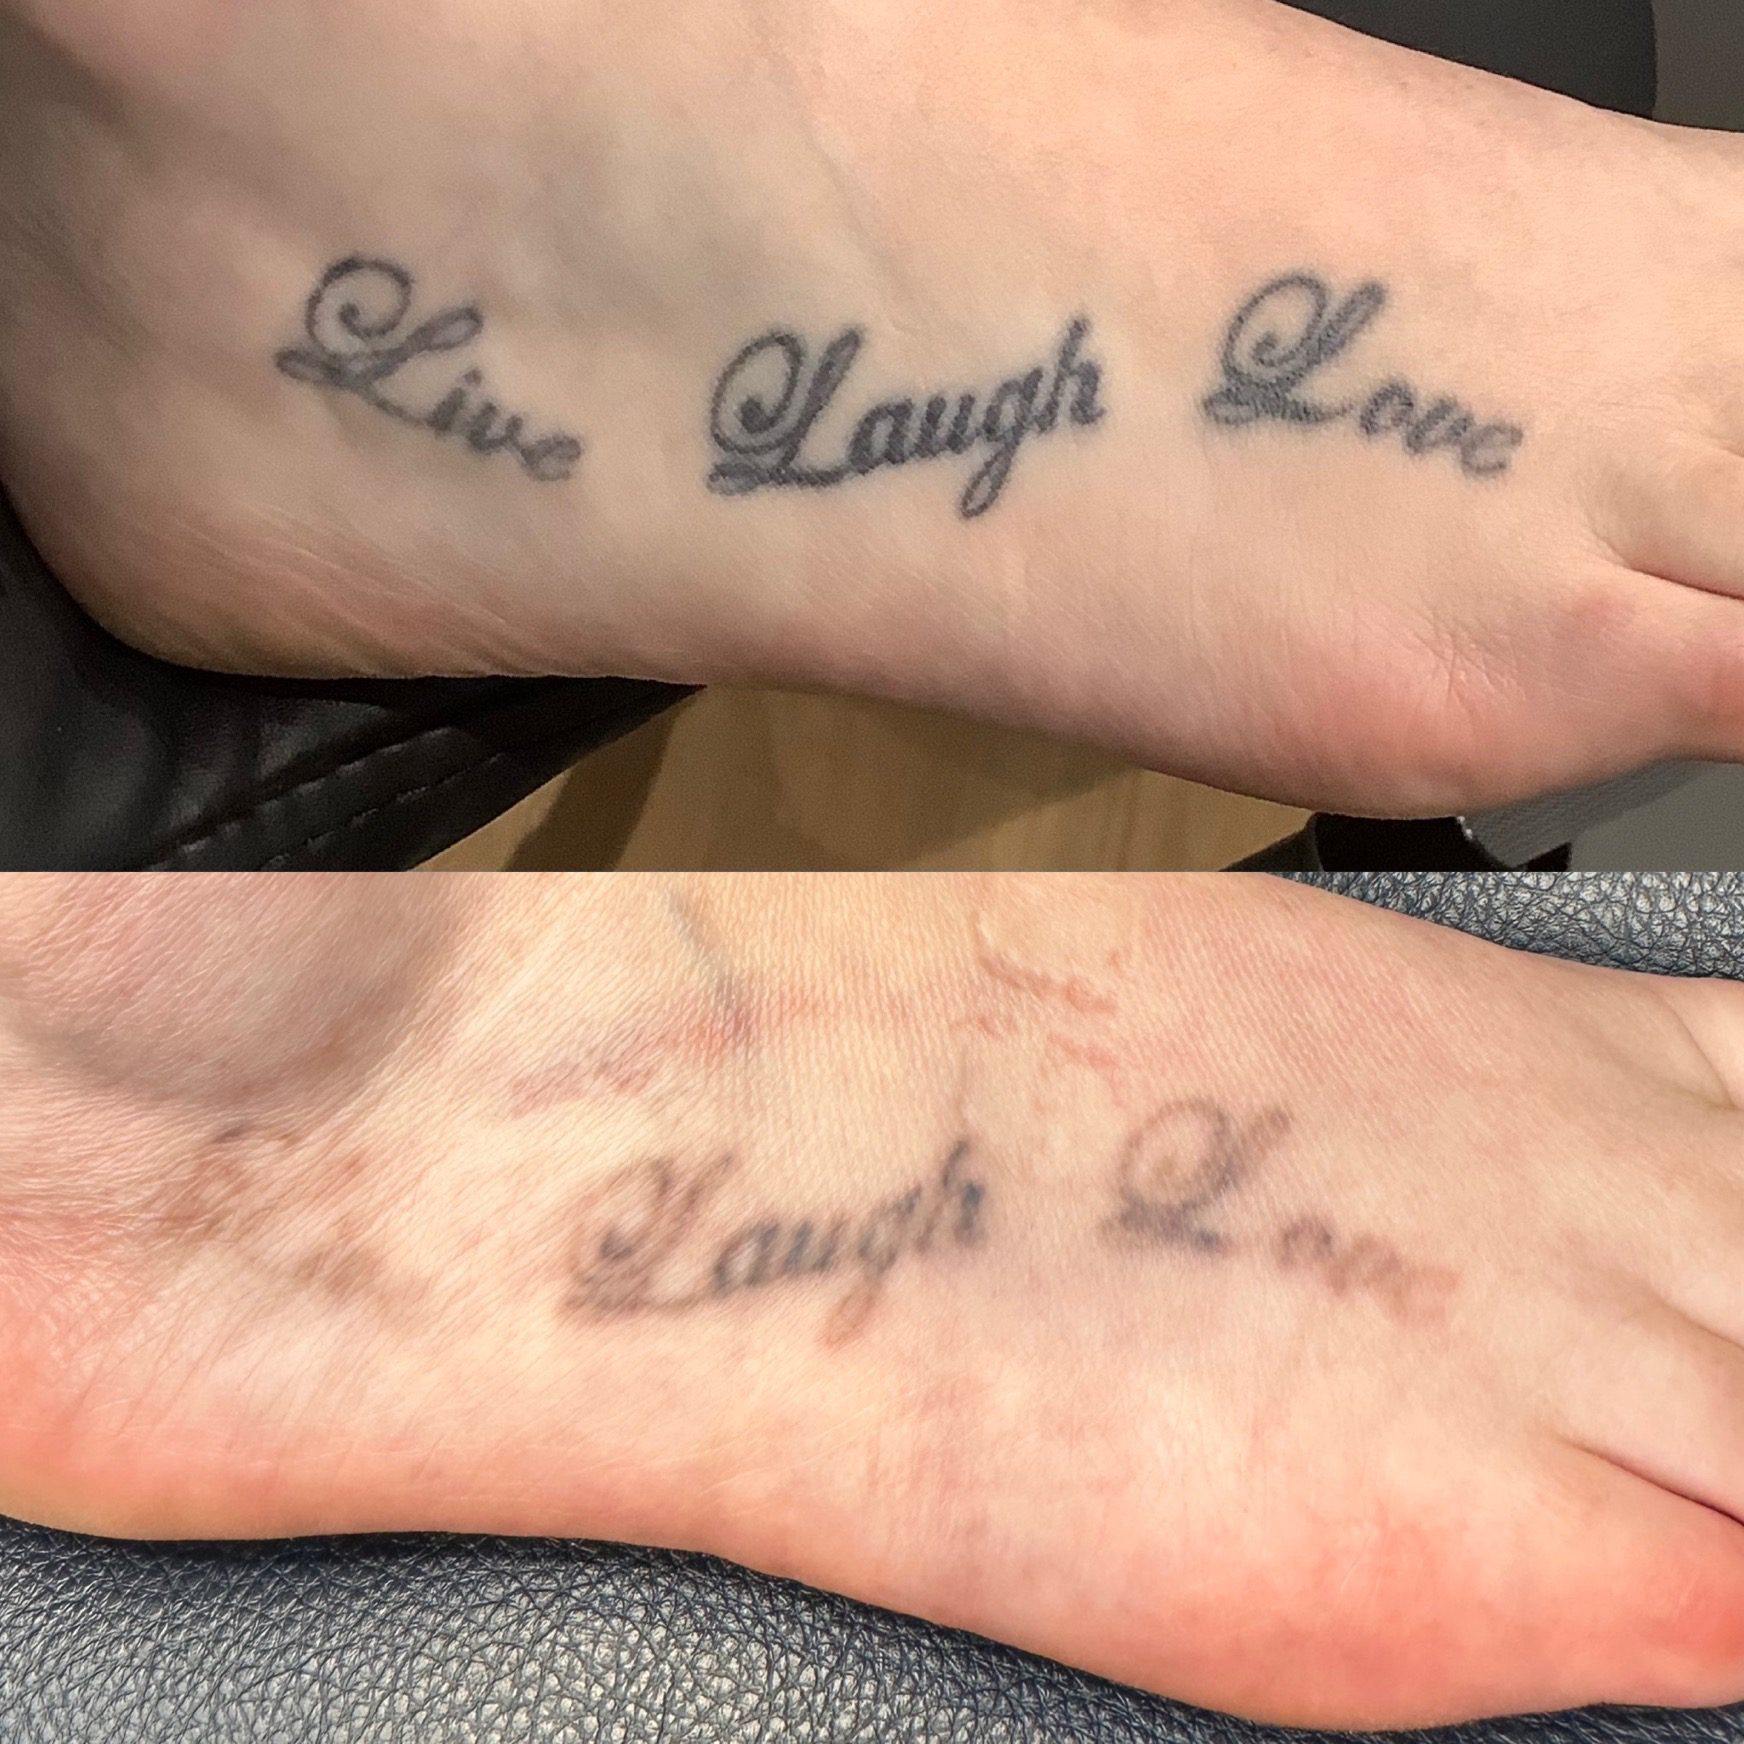 lauren-pay-national-tattoo-removal-day-2